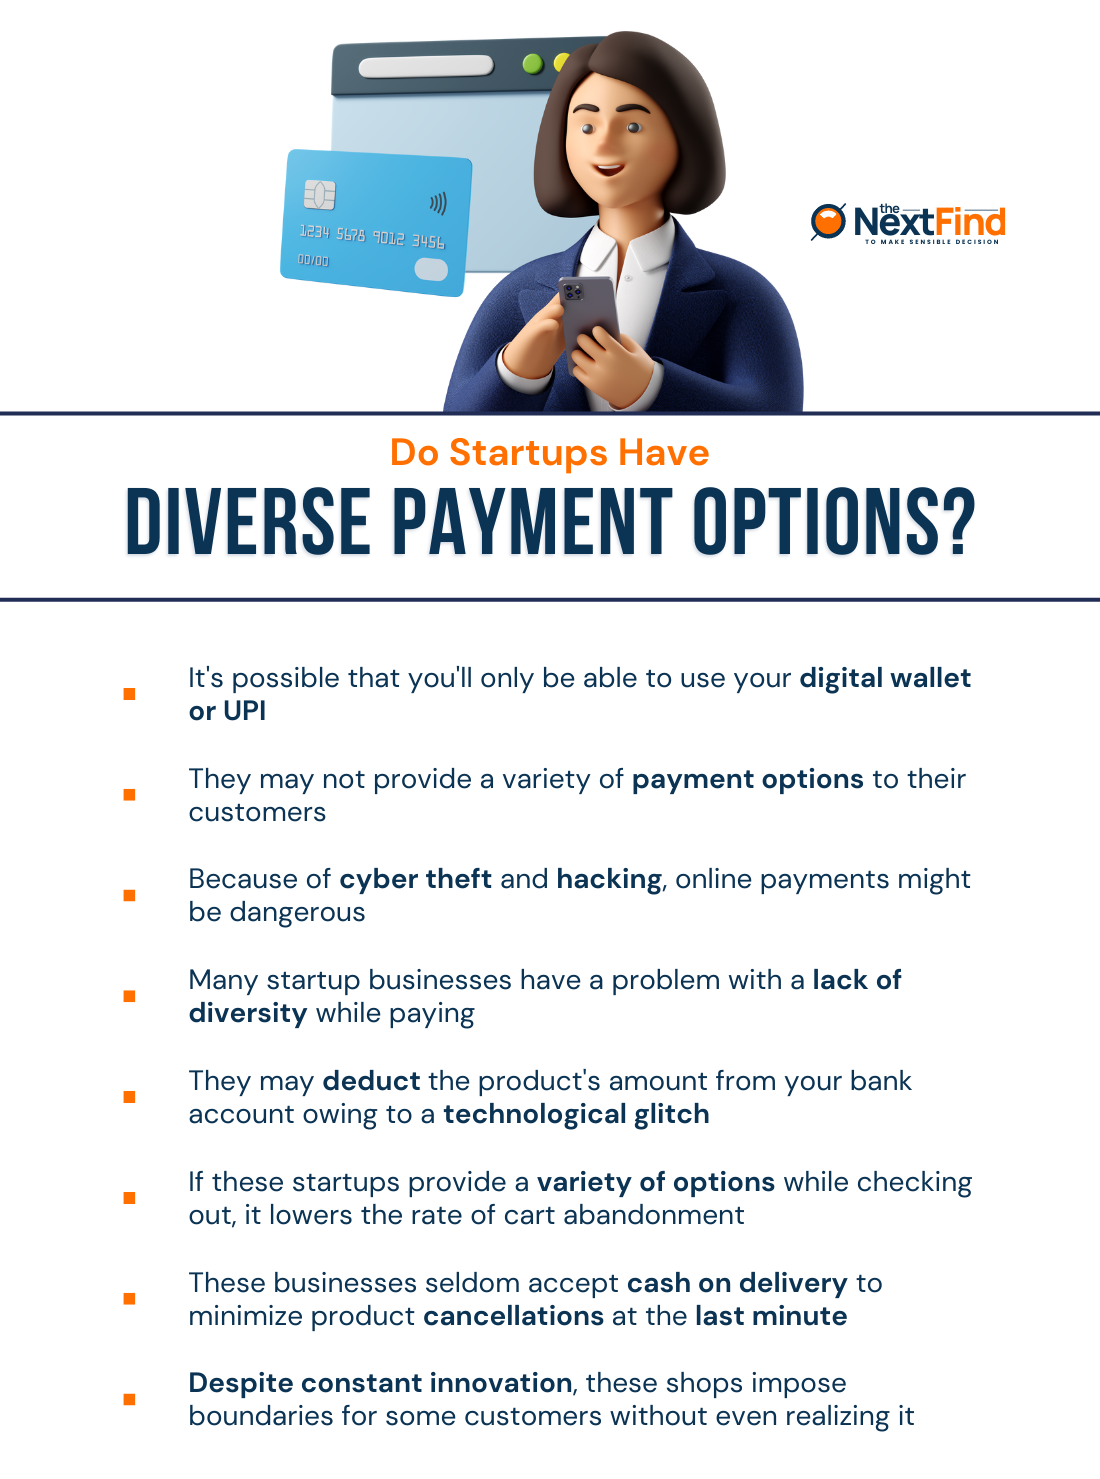 Do Startups Have Diverse Payment Options